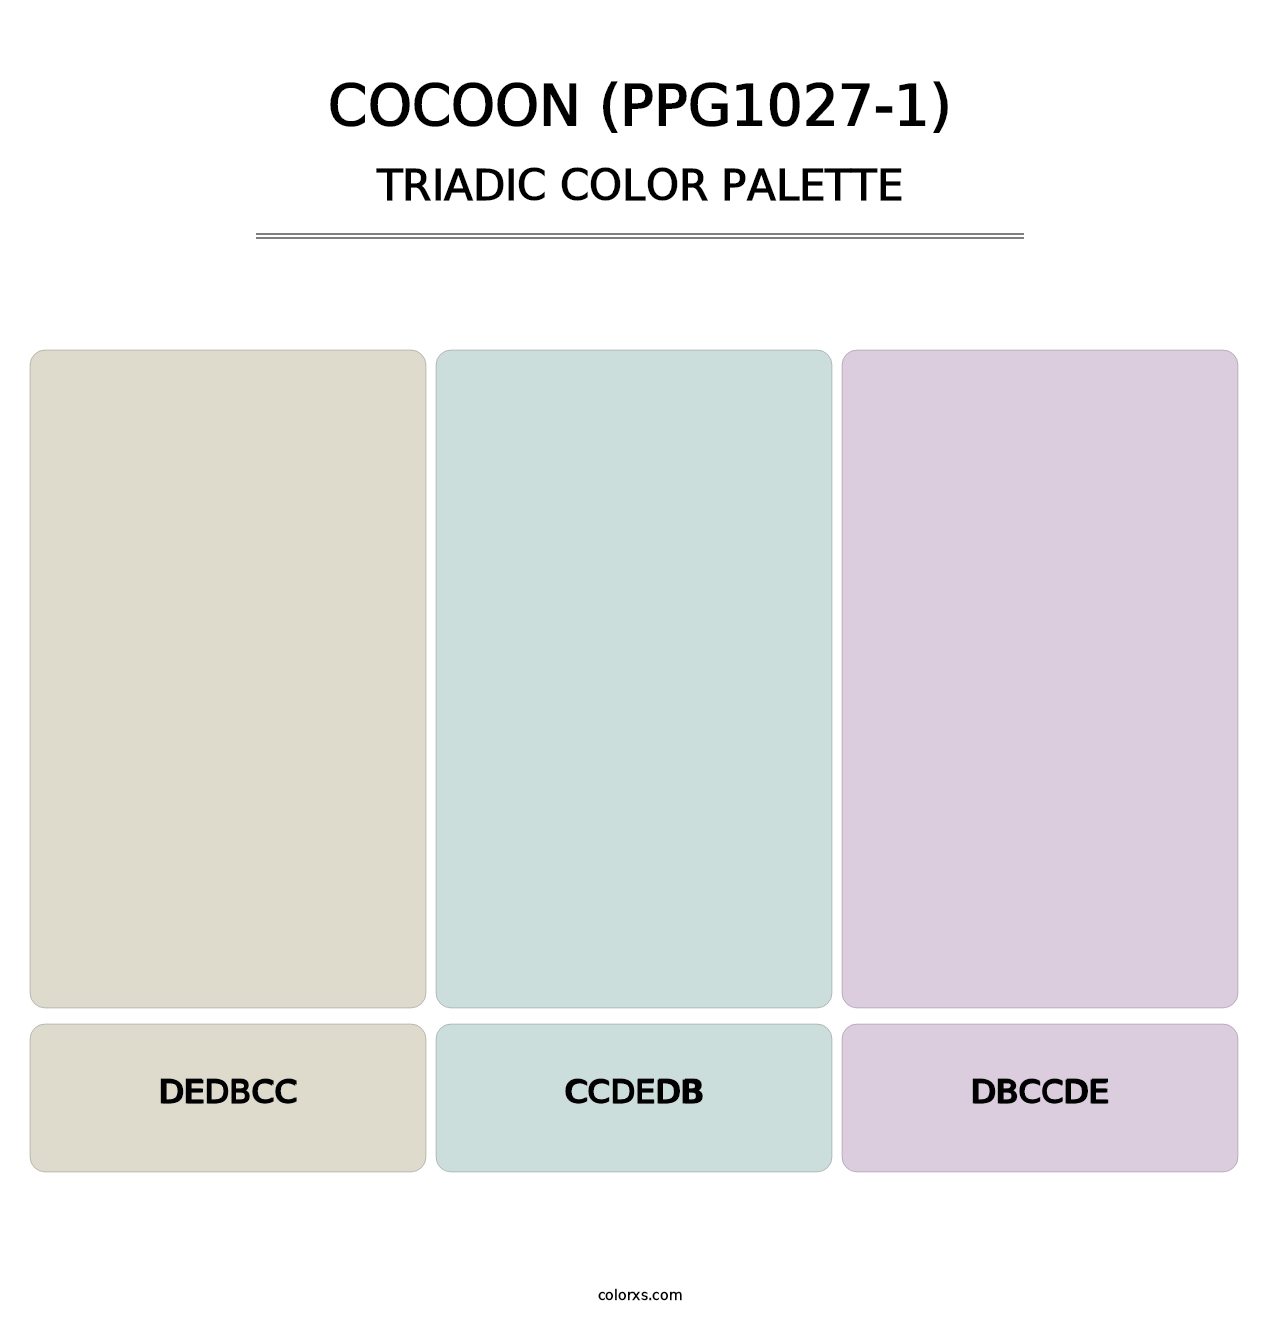 Cocoon (PPG1027-1) - Triadic Color Palette